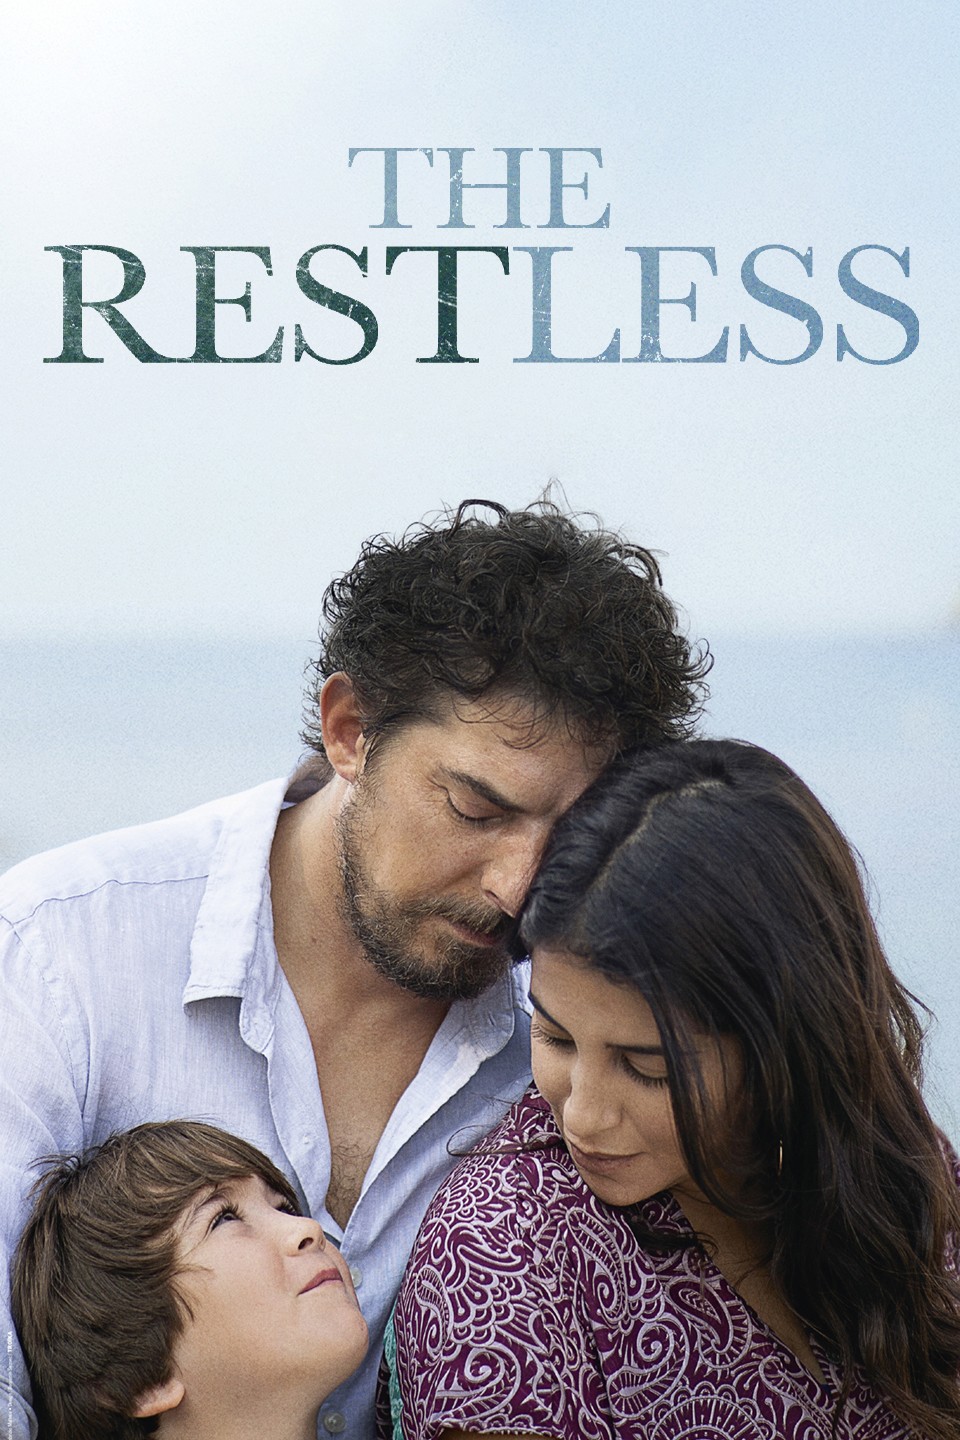 THE RESTLESS